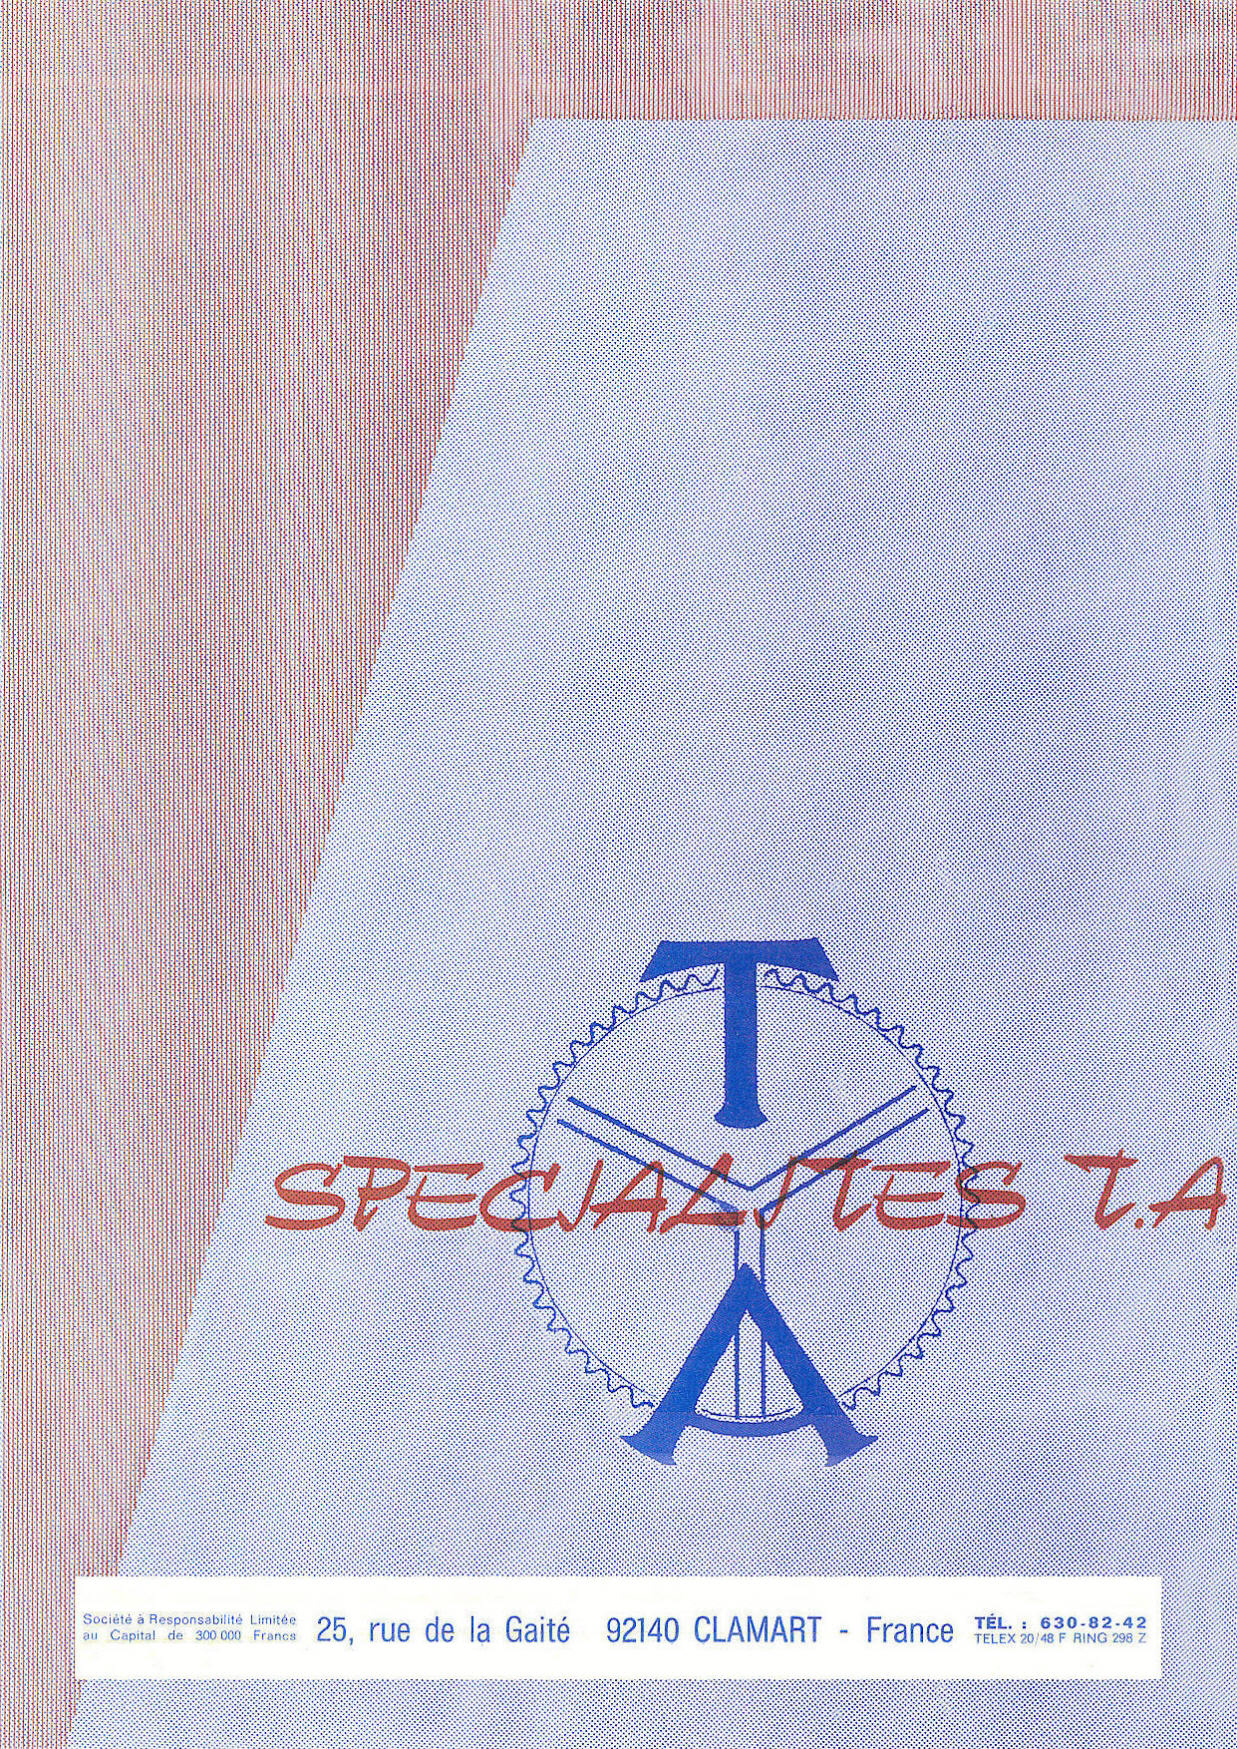 Specialites T.A. catalog (1973)